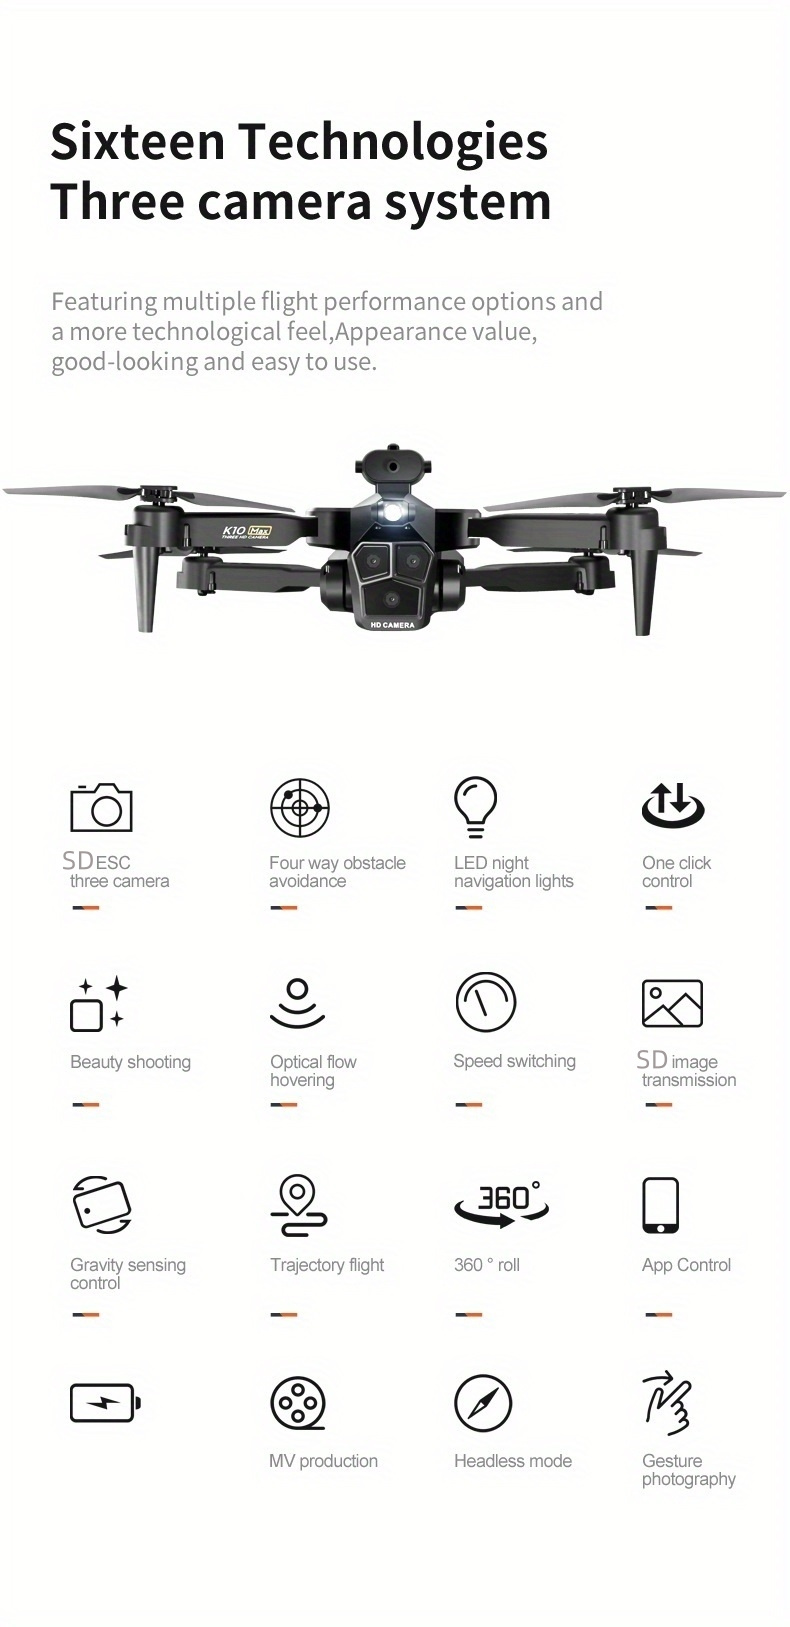 k10 max optical flow hd three cameras mini remote control drone 360 intelligent obstacle avoidance wifi fpv headless mode foldable quadcopter uav details 6